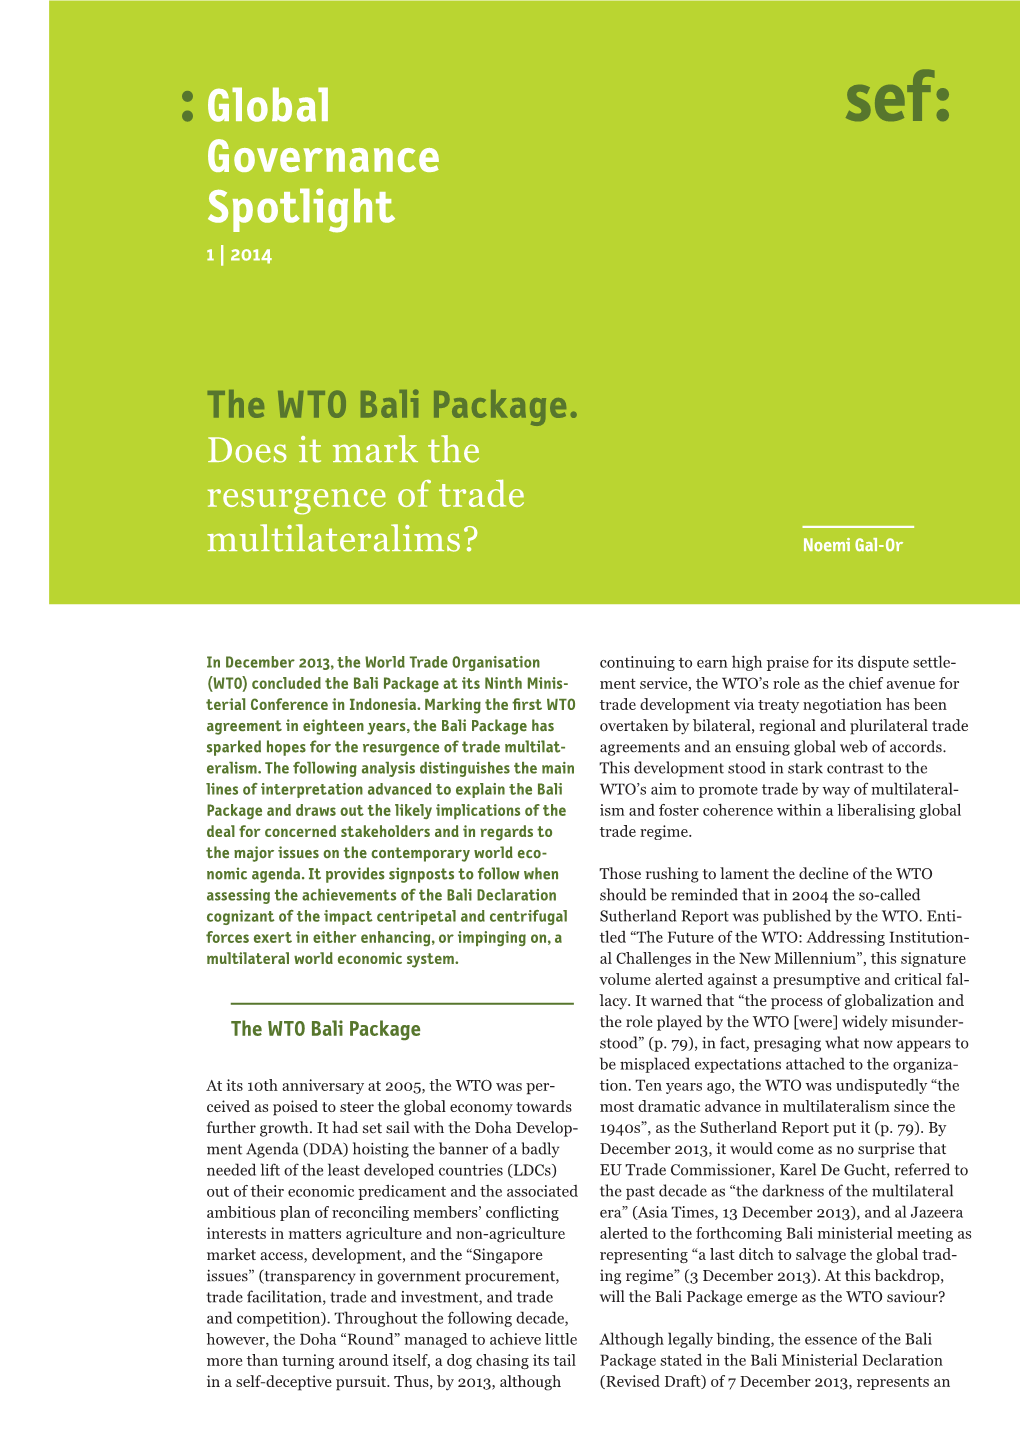 The WTO Bali Package. Does It Mark the Resurgence of Trade Multilateralims? Noemi Gal-Or